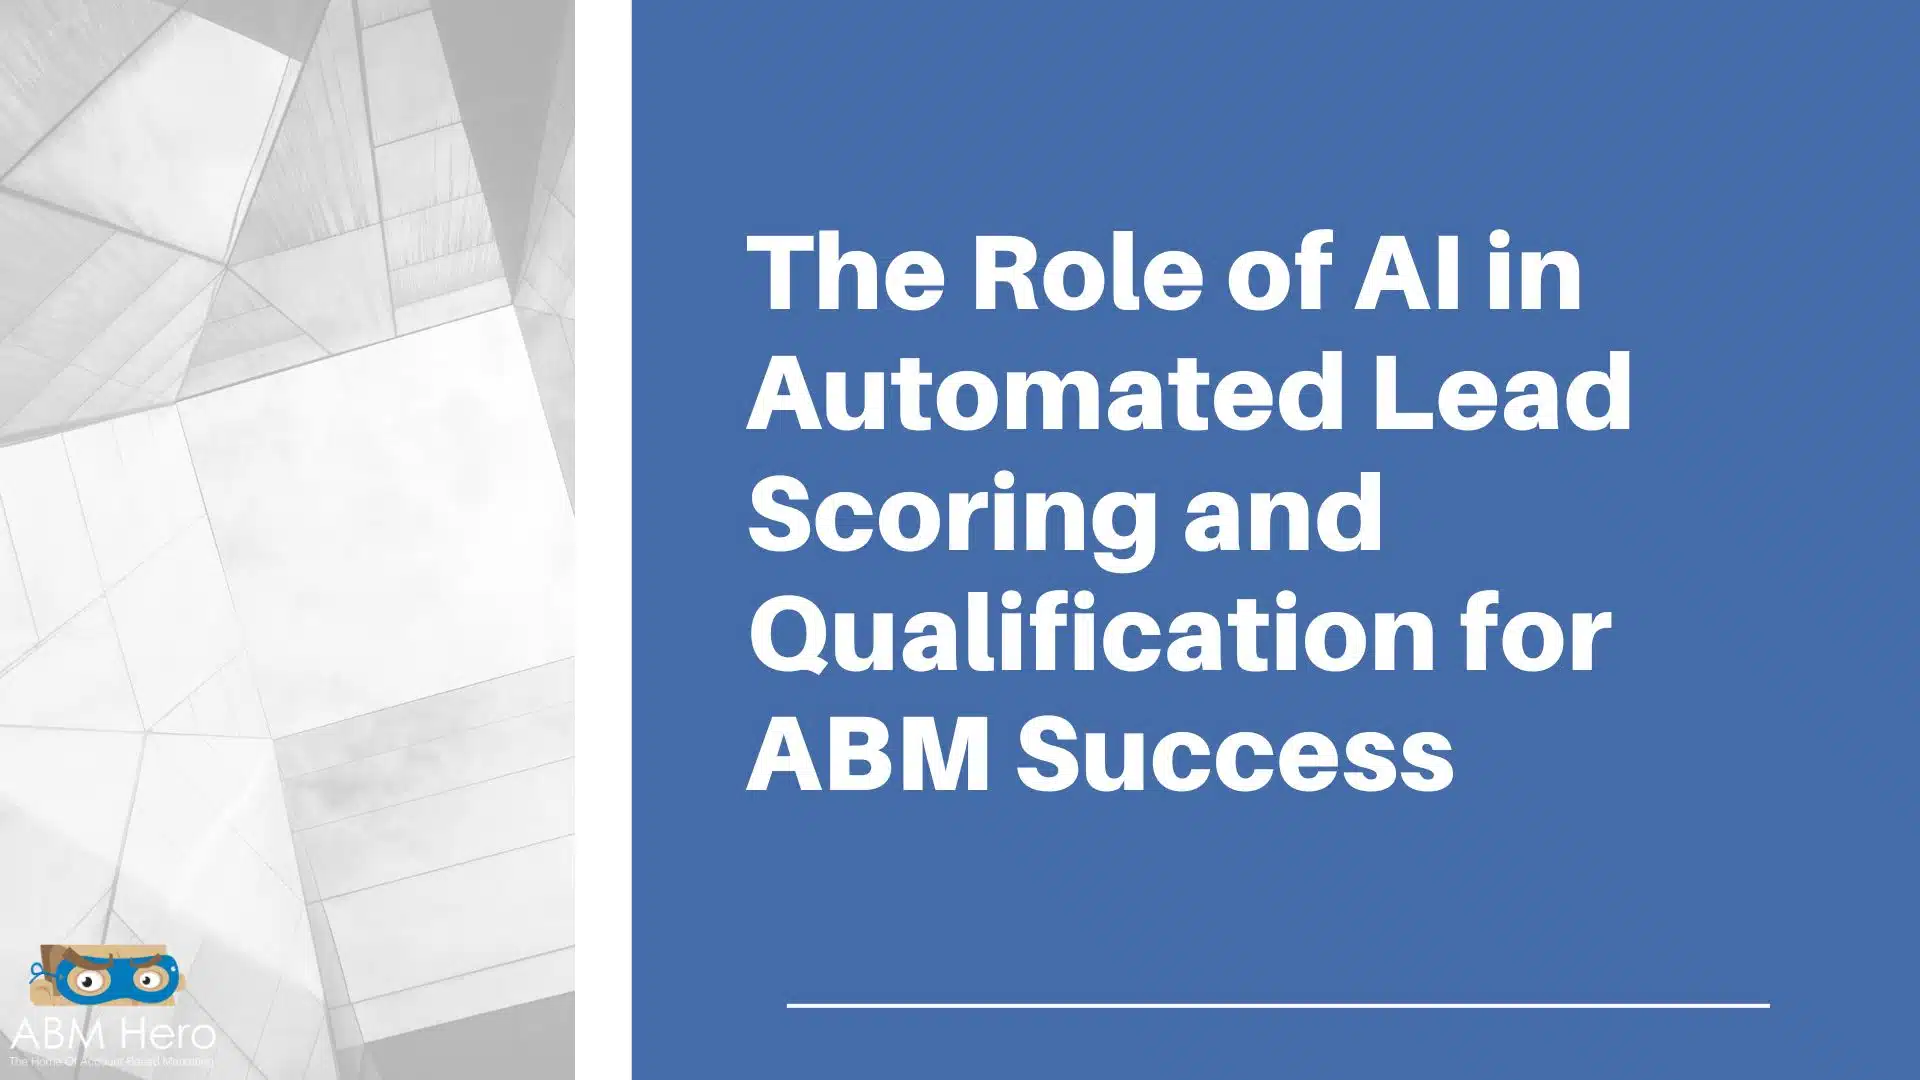 You are currently viewing The Role of AI in Automated Lead Scoring and Qualification for ABM Success